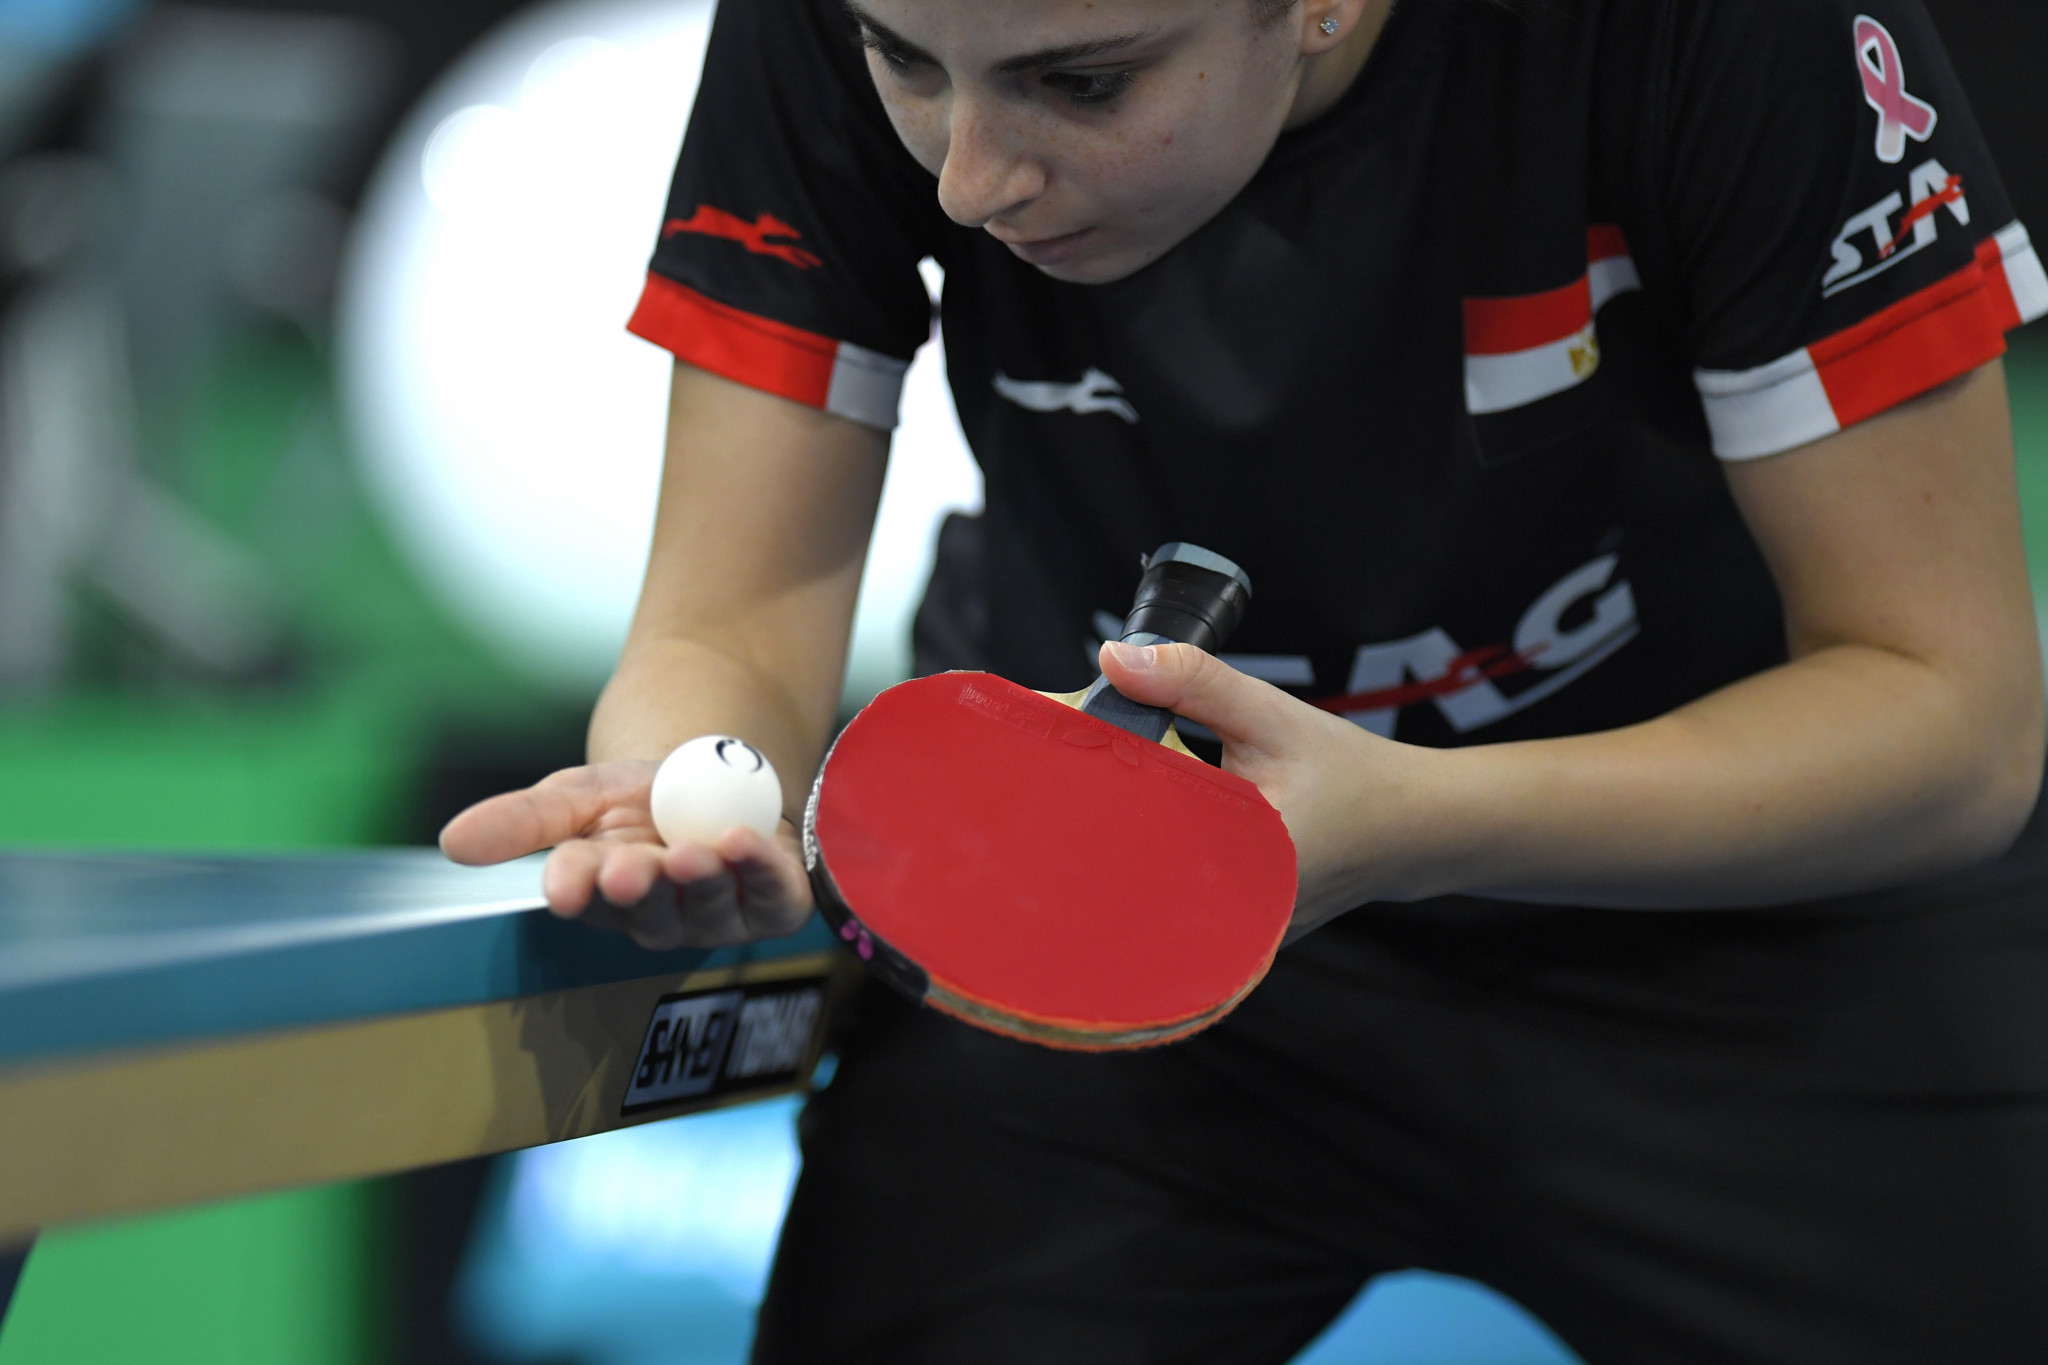 Egypt's Dina Meshref secured her fourth consecutive women's singles title ©Getty Images